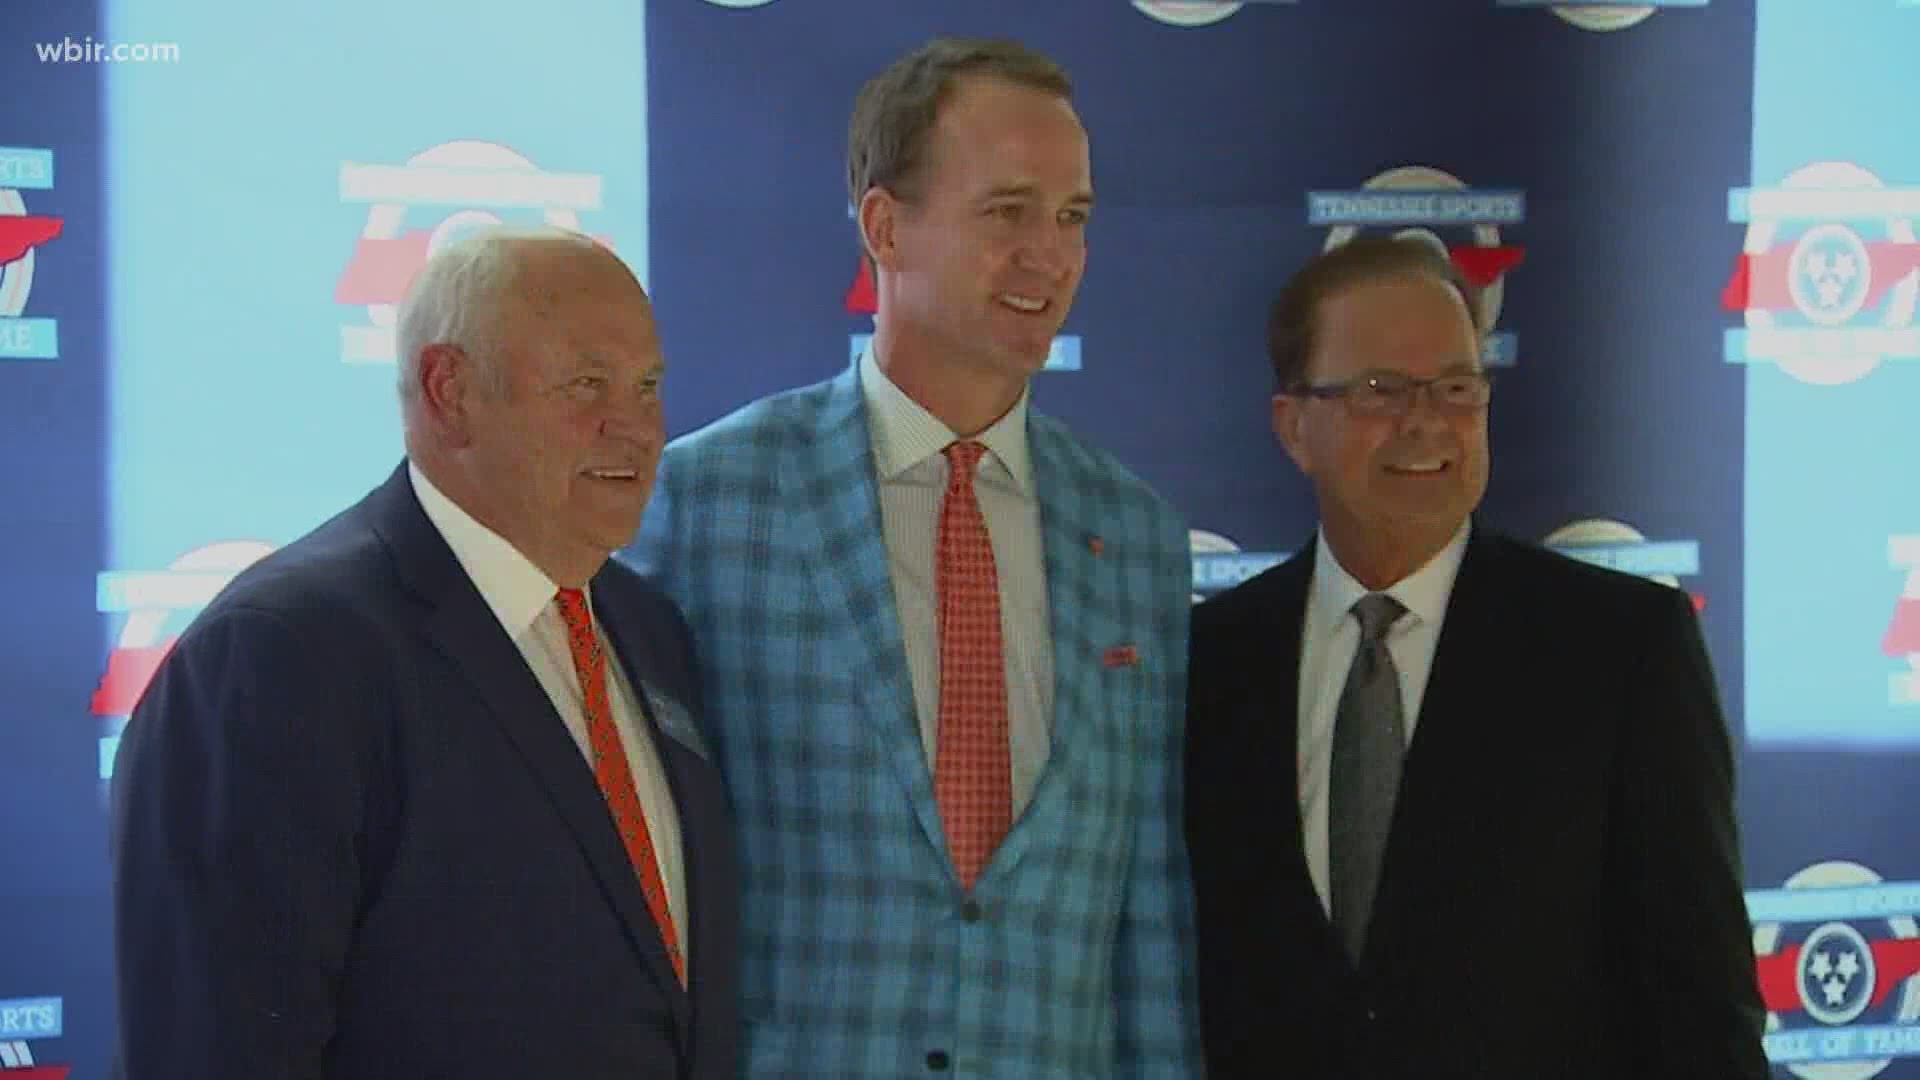 A five-time MVP, a two-time Super Bowl champion, and now a Pro Football Hall-of-Famer. Peyton Manning is a Tennessee legend.